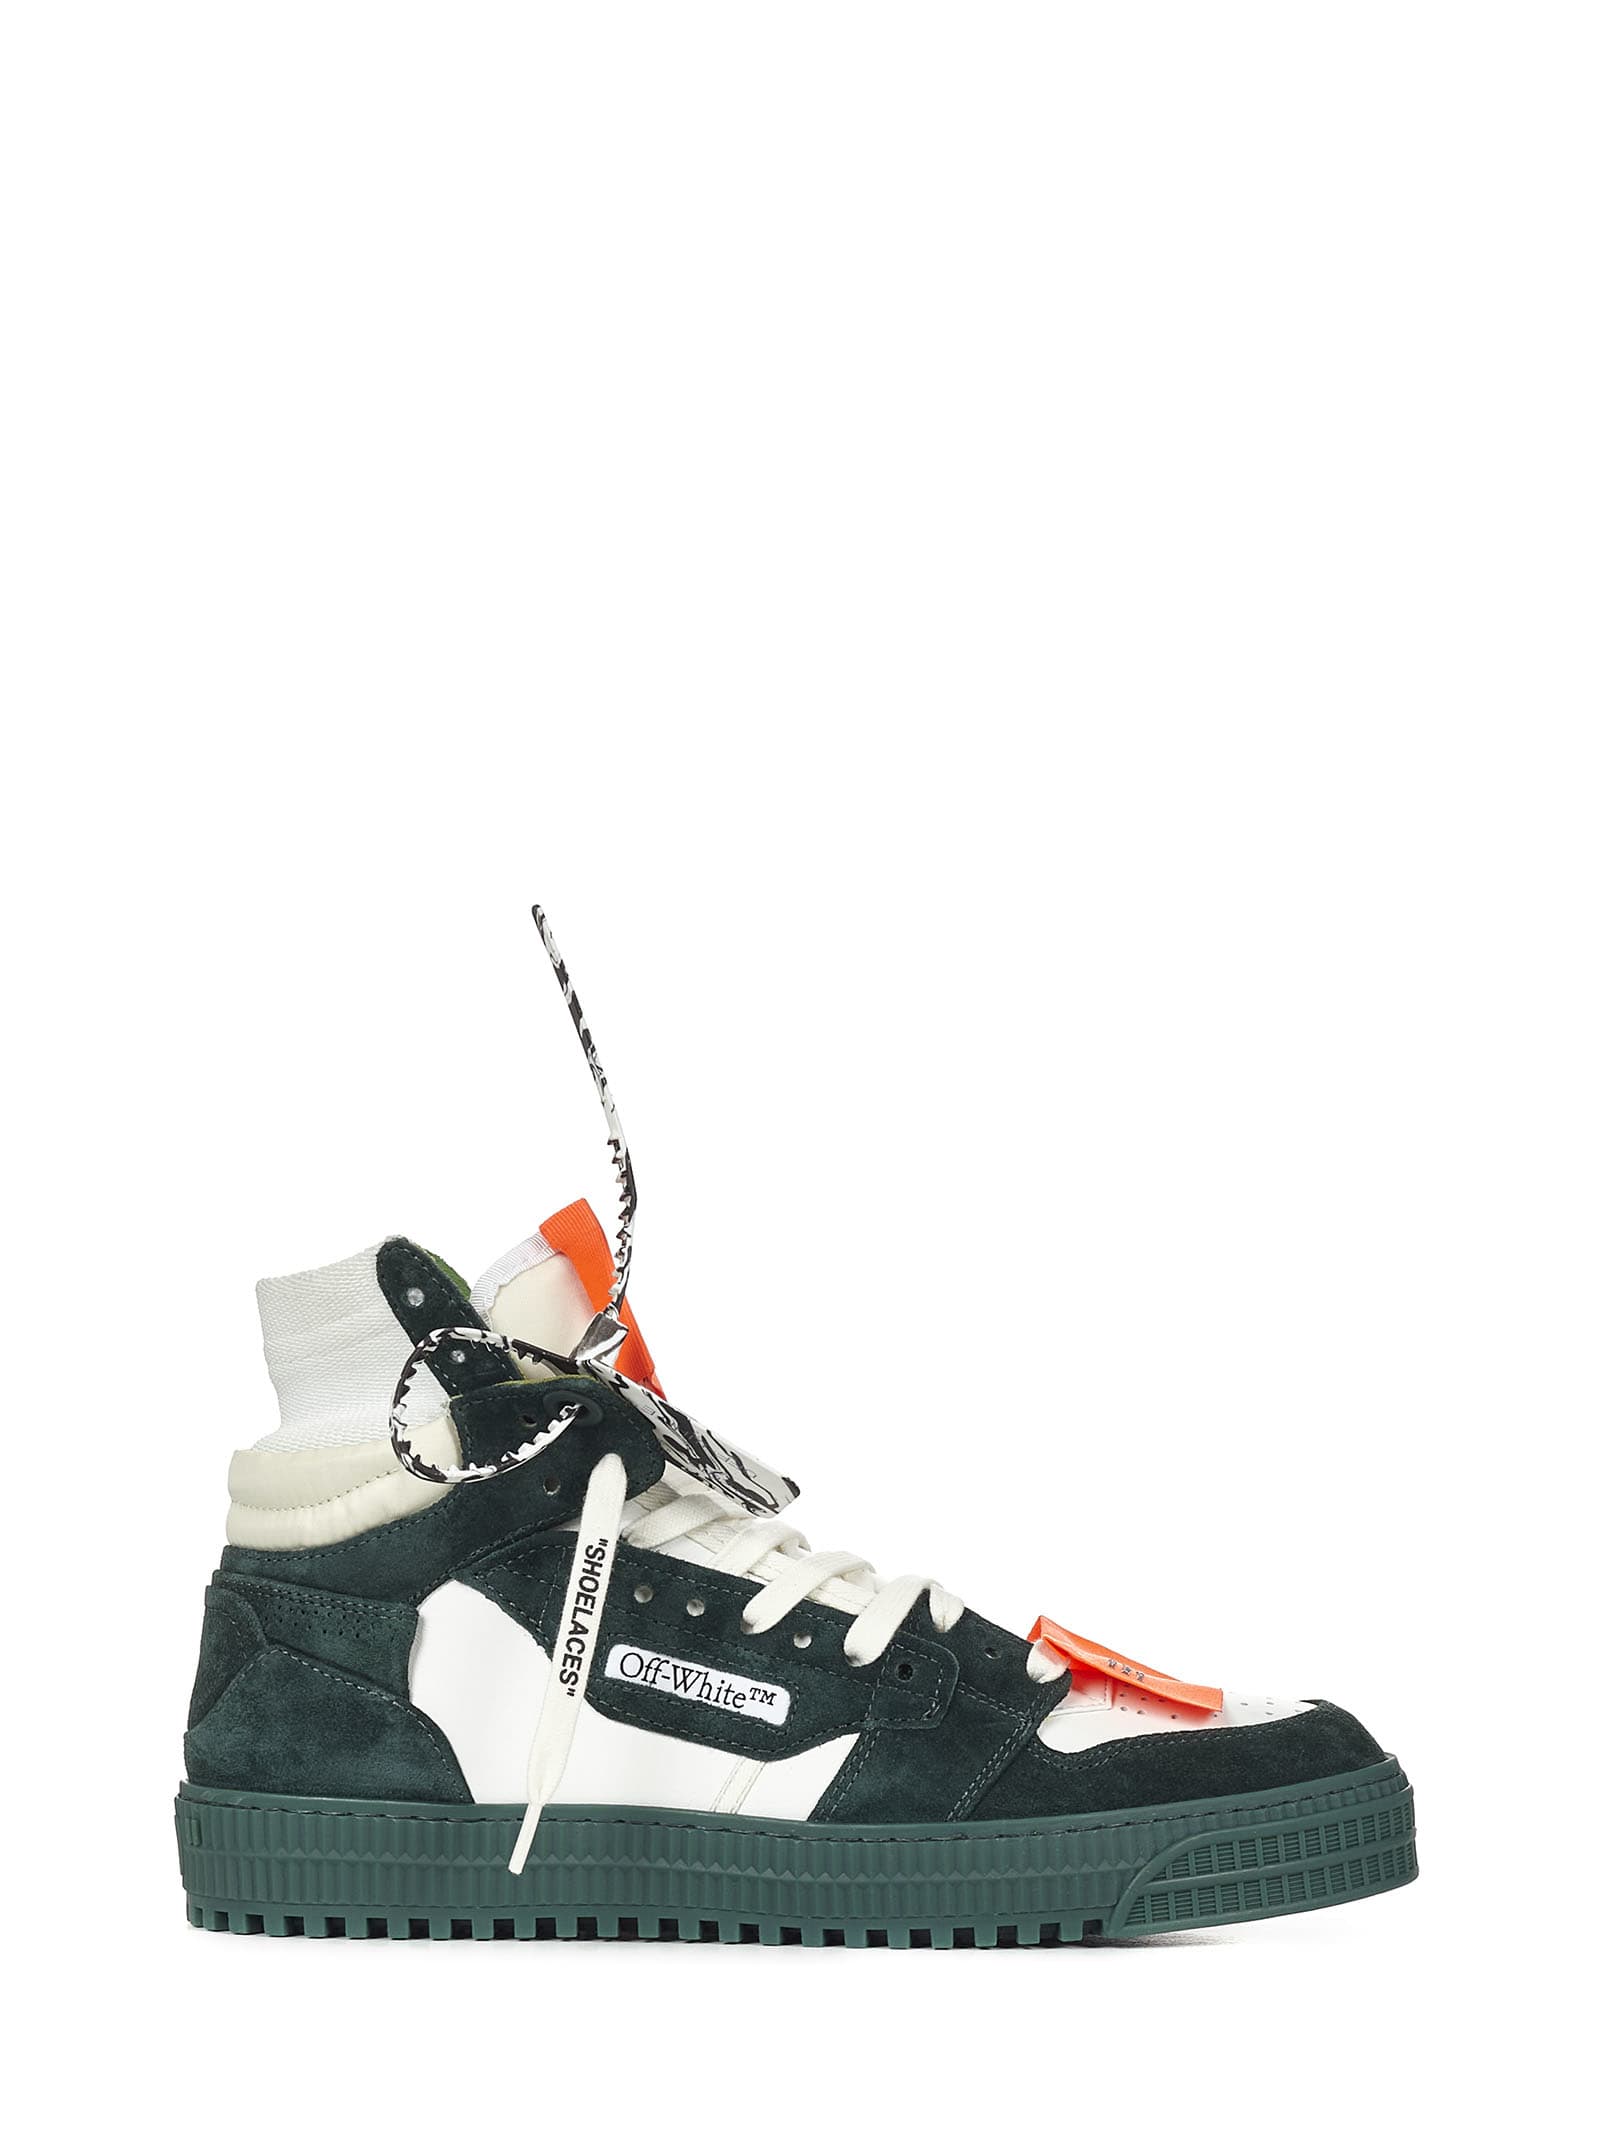 Off-white Off-court 3.0 Sneakers In Green | ModeSens